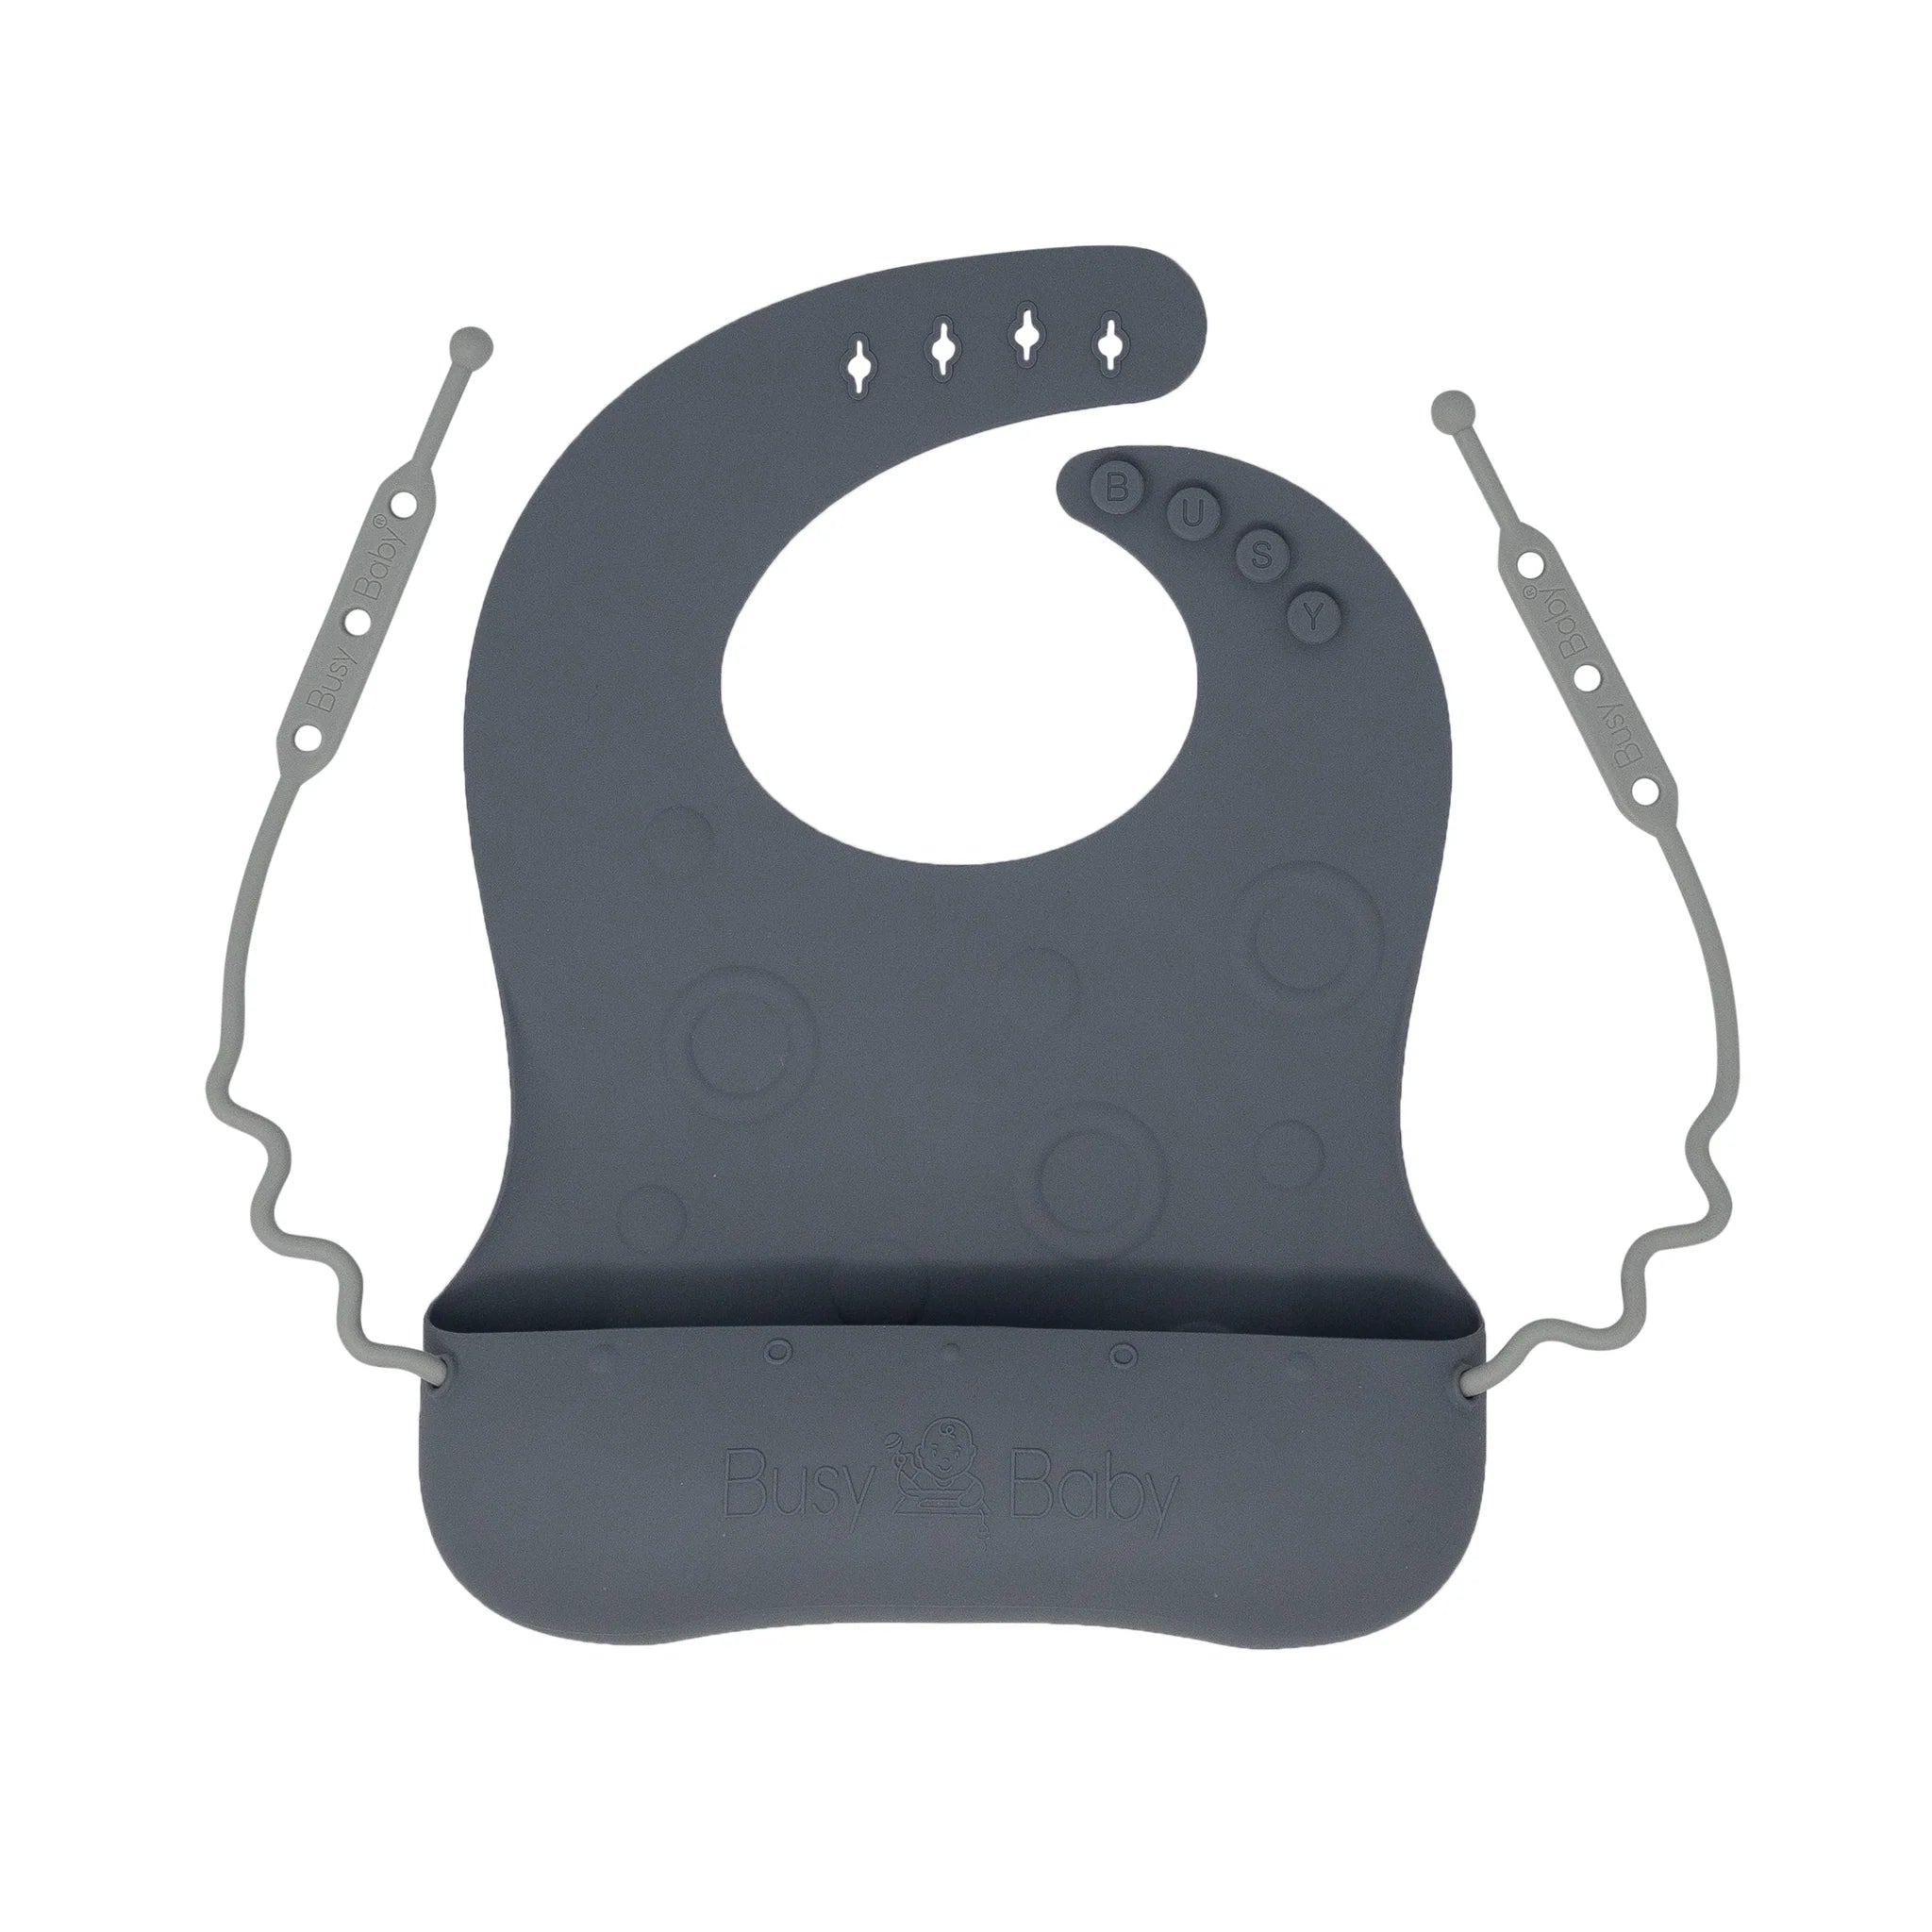 Busy Baby Bungee Bib & Tether System - Pewter-BUSY BABY-Little Giant Kidz